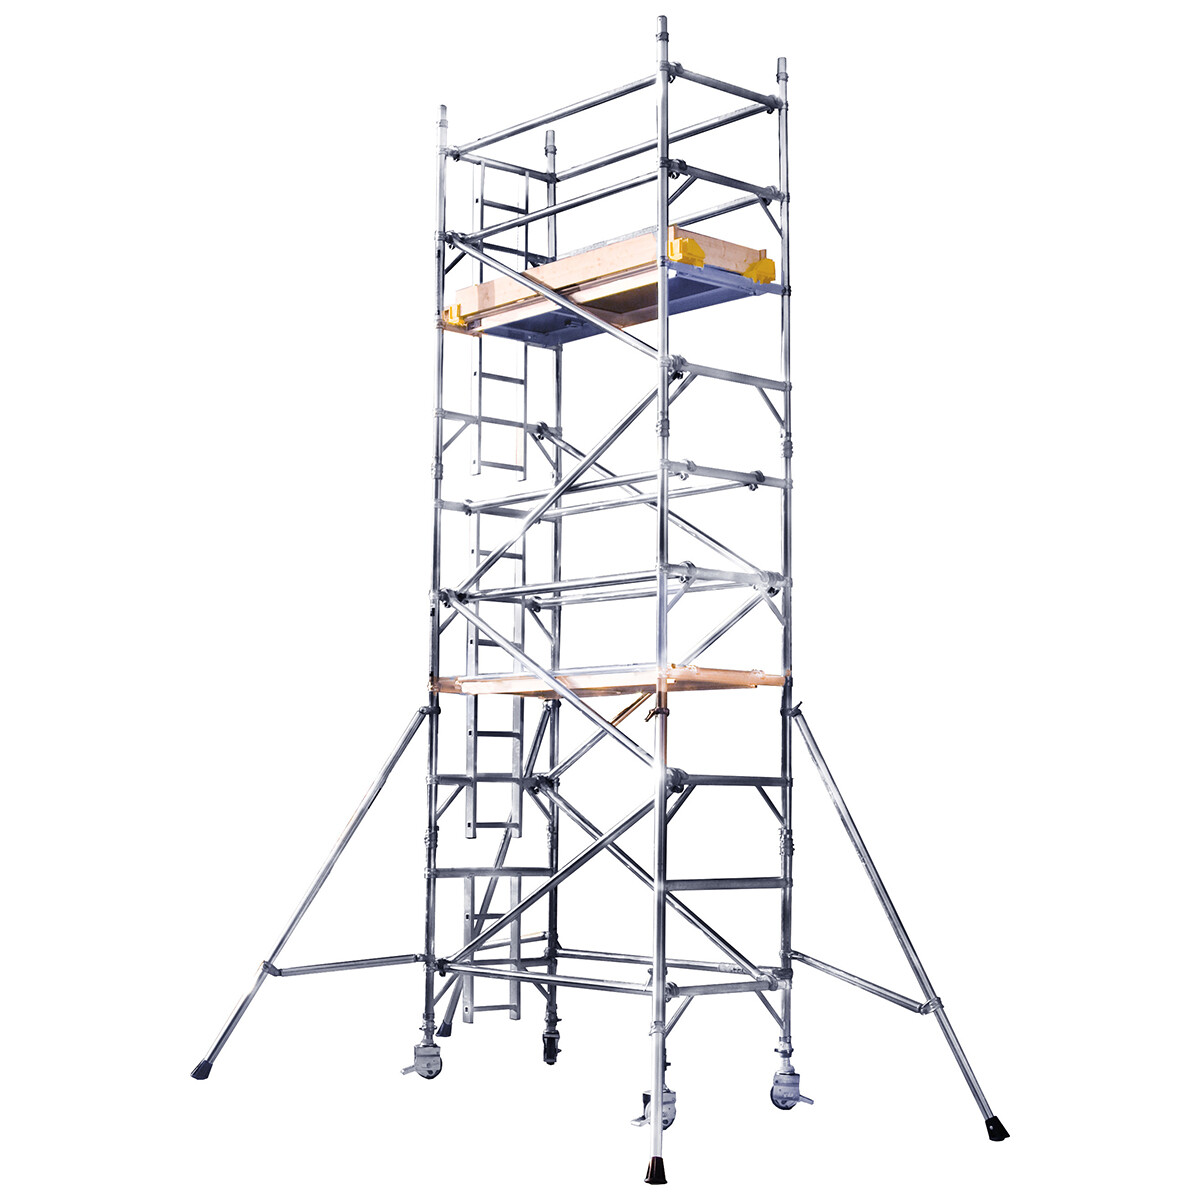 Narrow Span Mobile Tower - 0.85m wide x 9.3m high